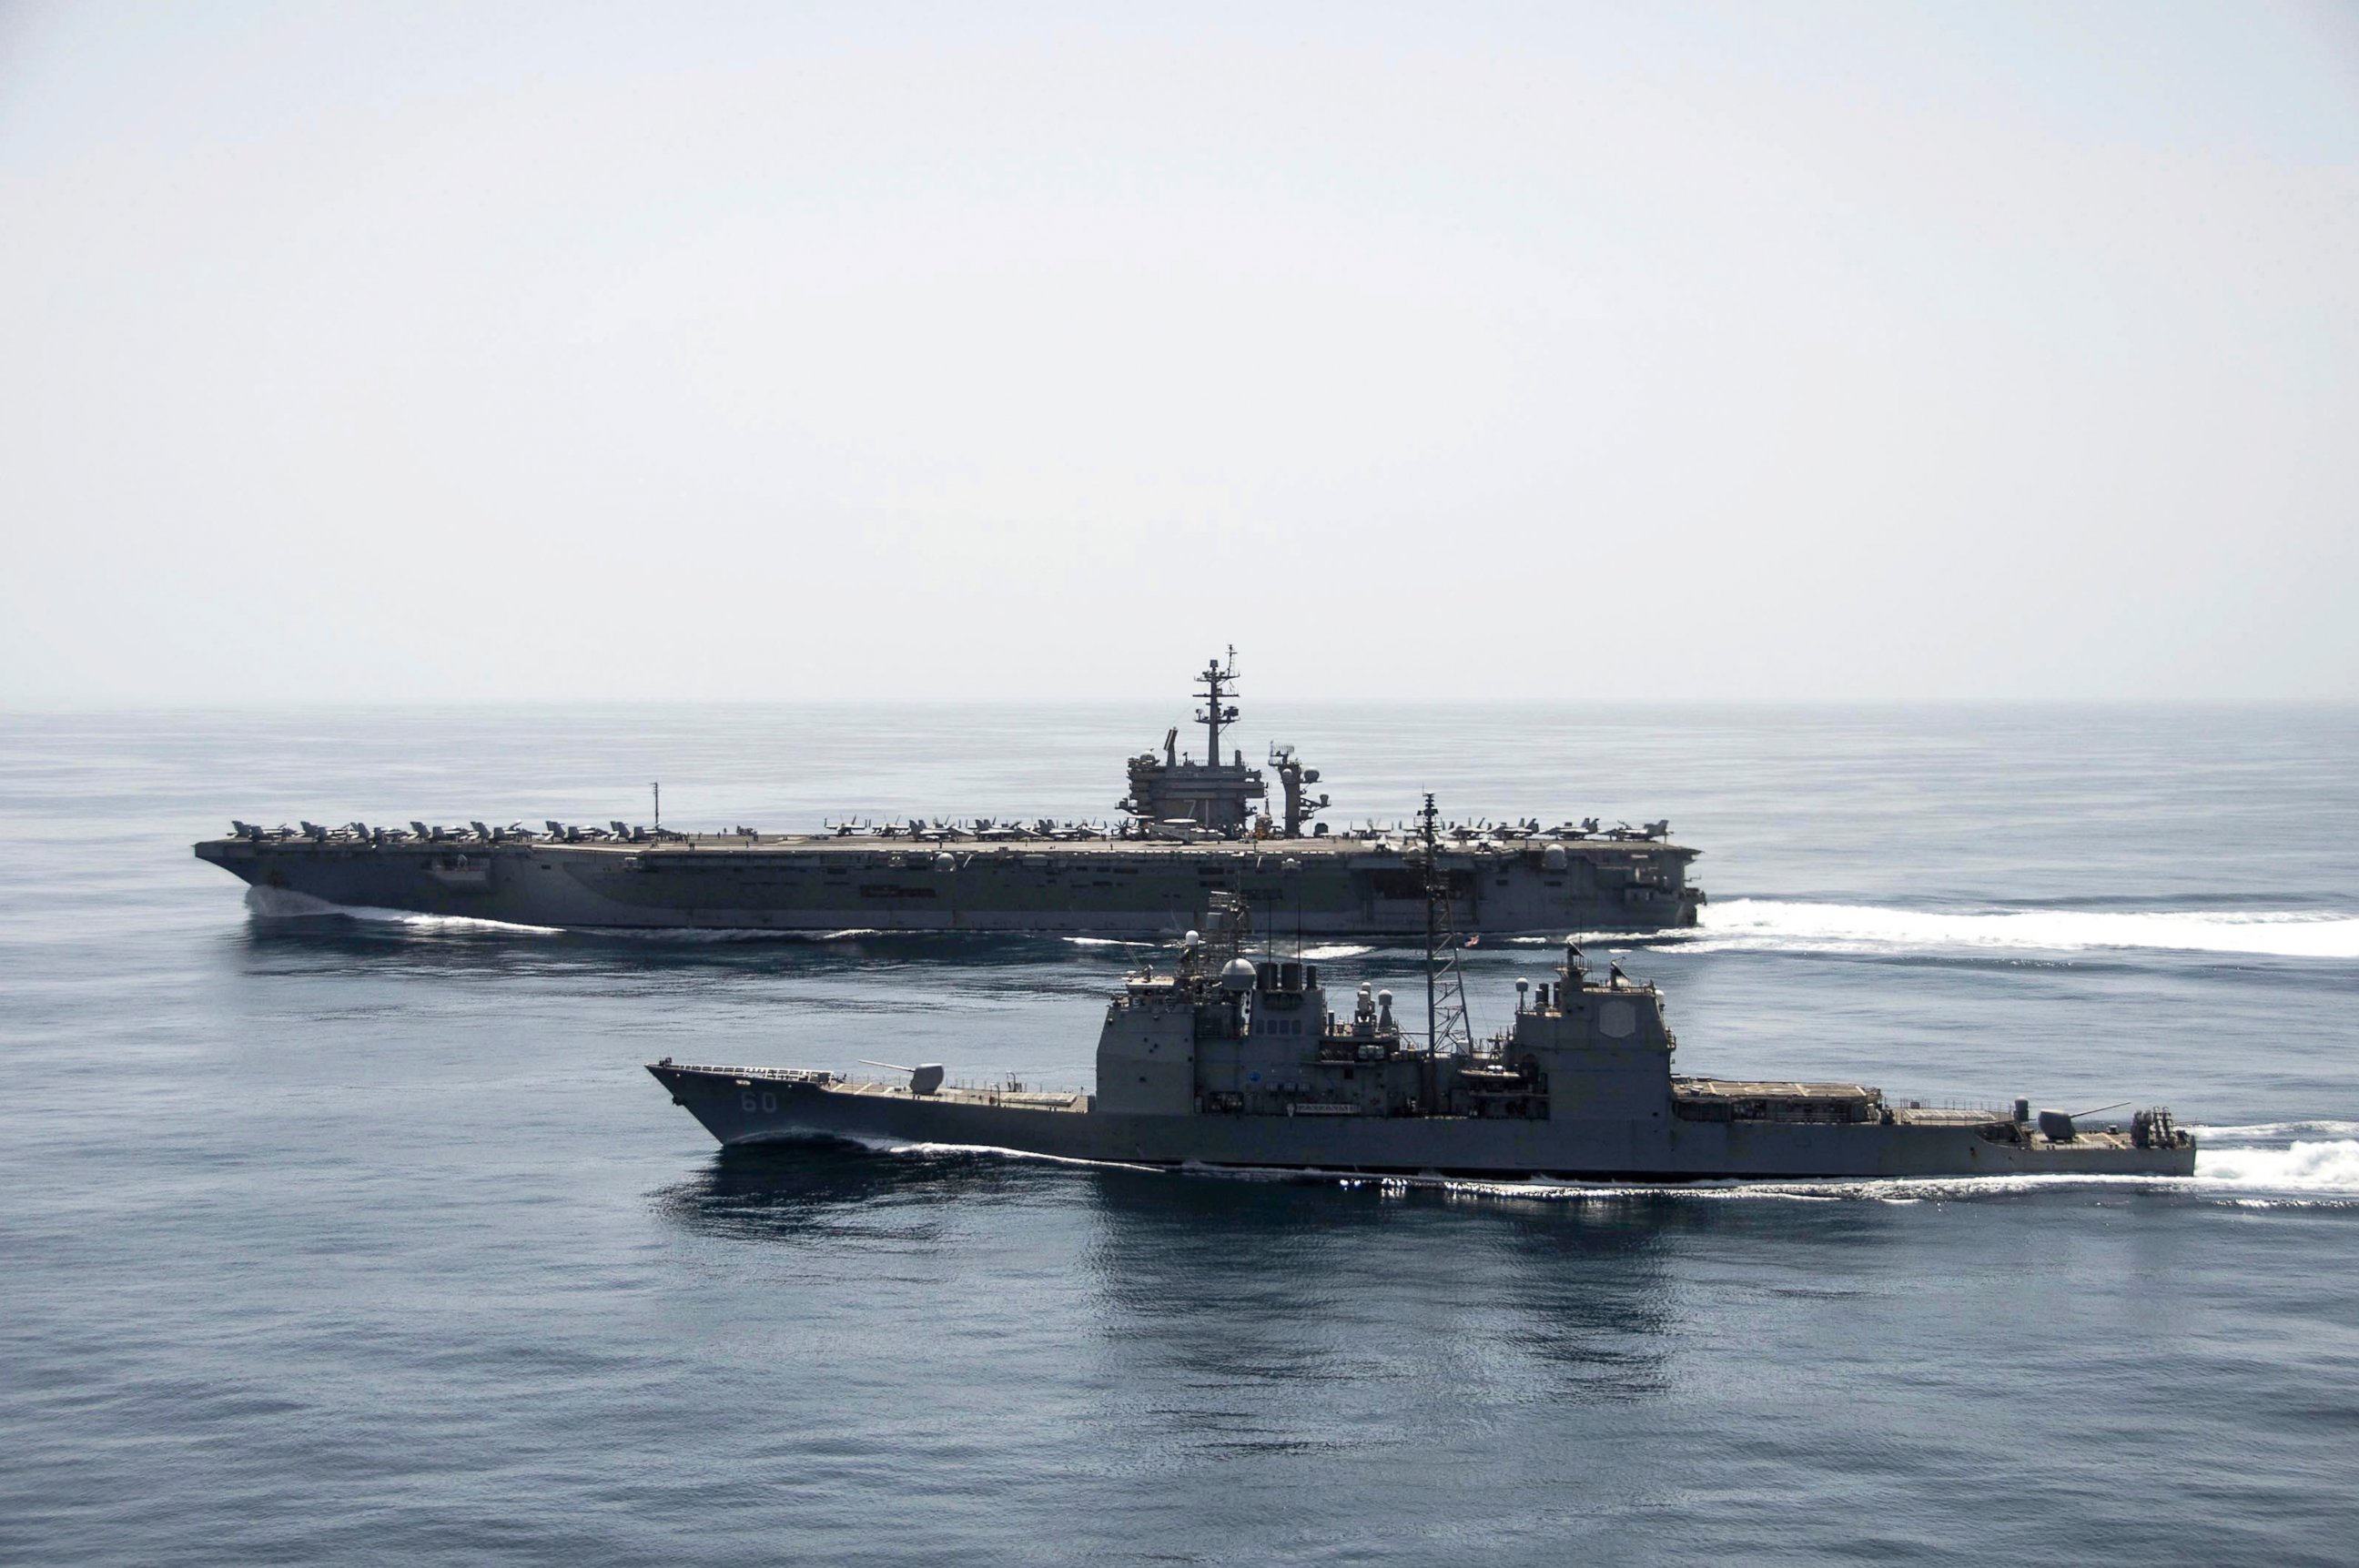 PHOTO: The aircraft carrier USS Theodore Roosevelt (CVN 71) and the guided-missile cruiser USS Normandy (CG 60) operate in the Arabian Sea conducting maritime security operations.